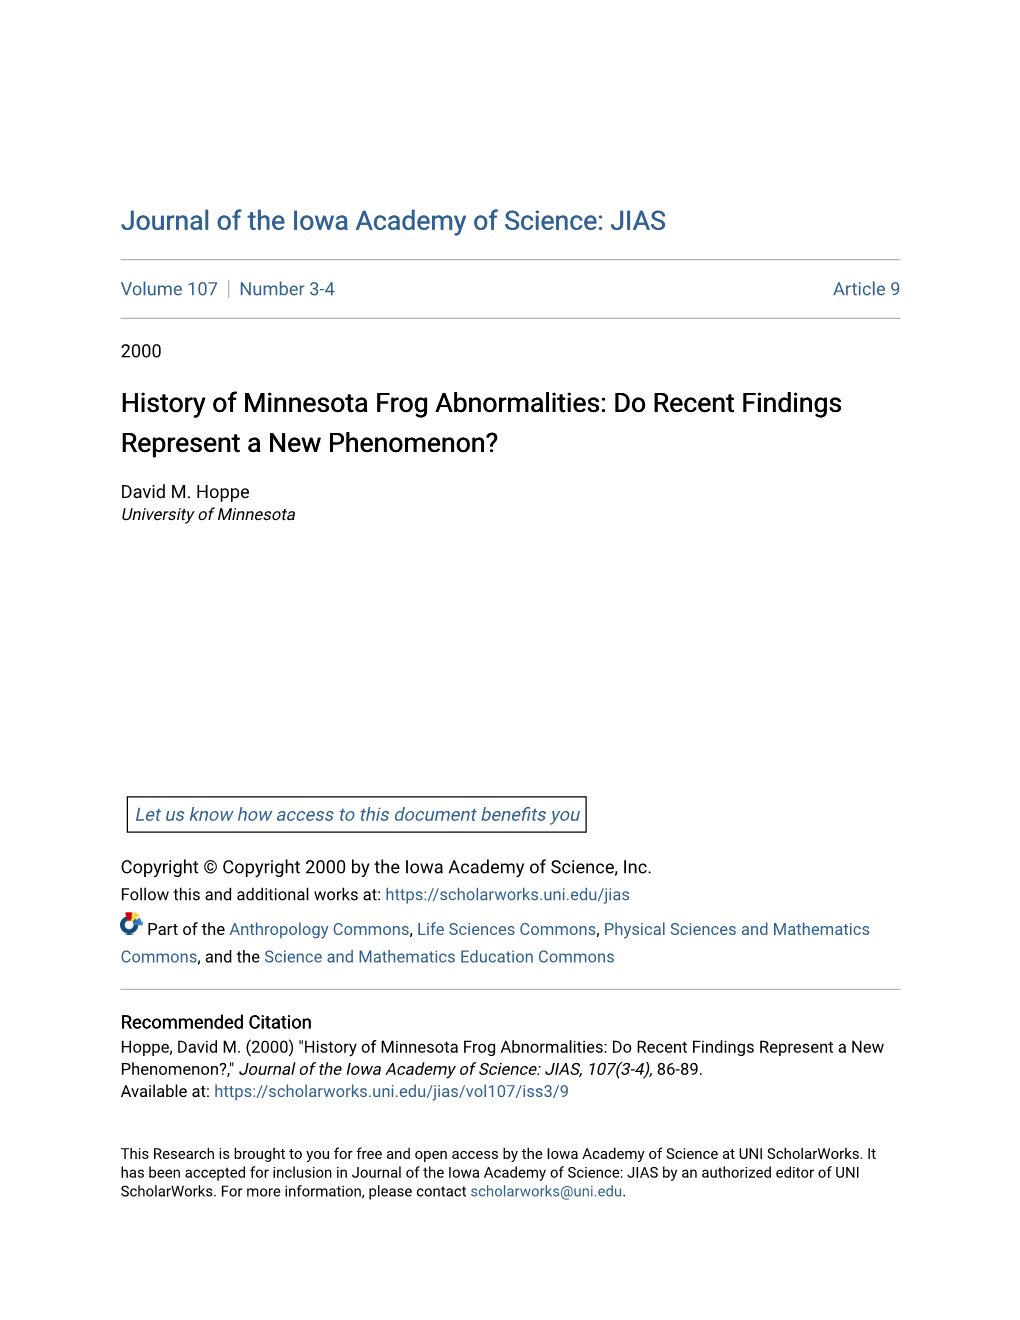 History of Minnesota Frog Abnormalities: Do Recent Findings Represent a New Phenomenon?